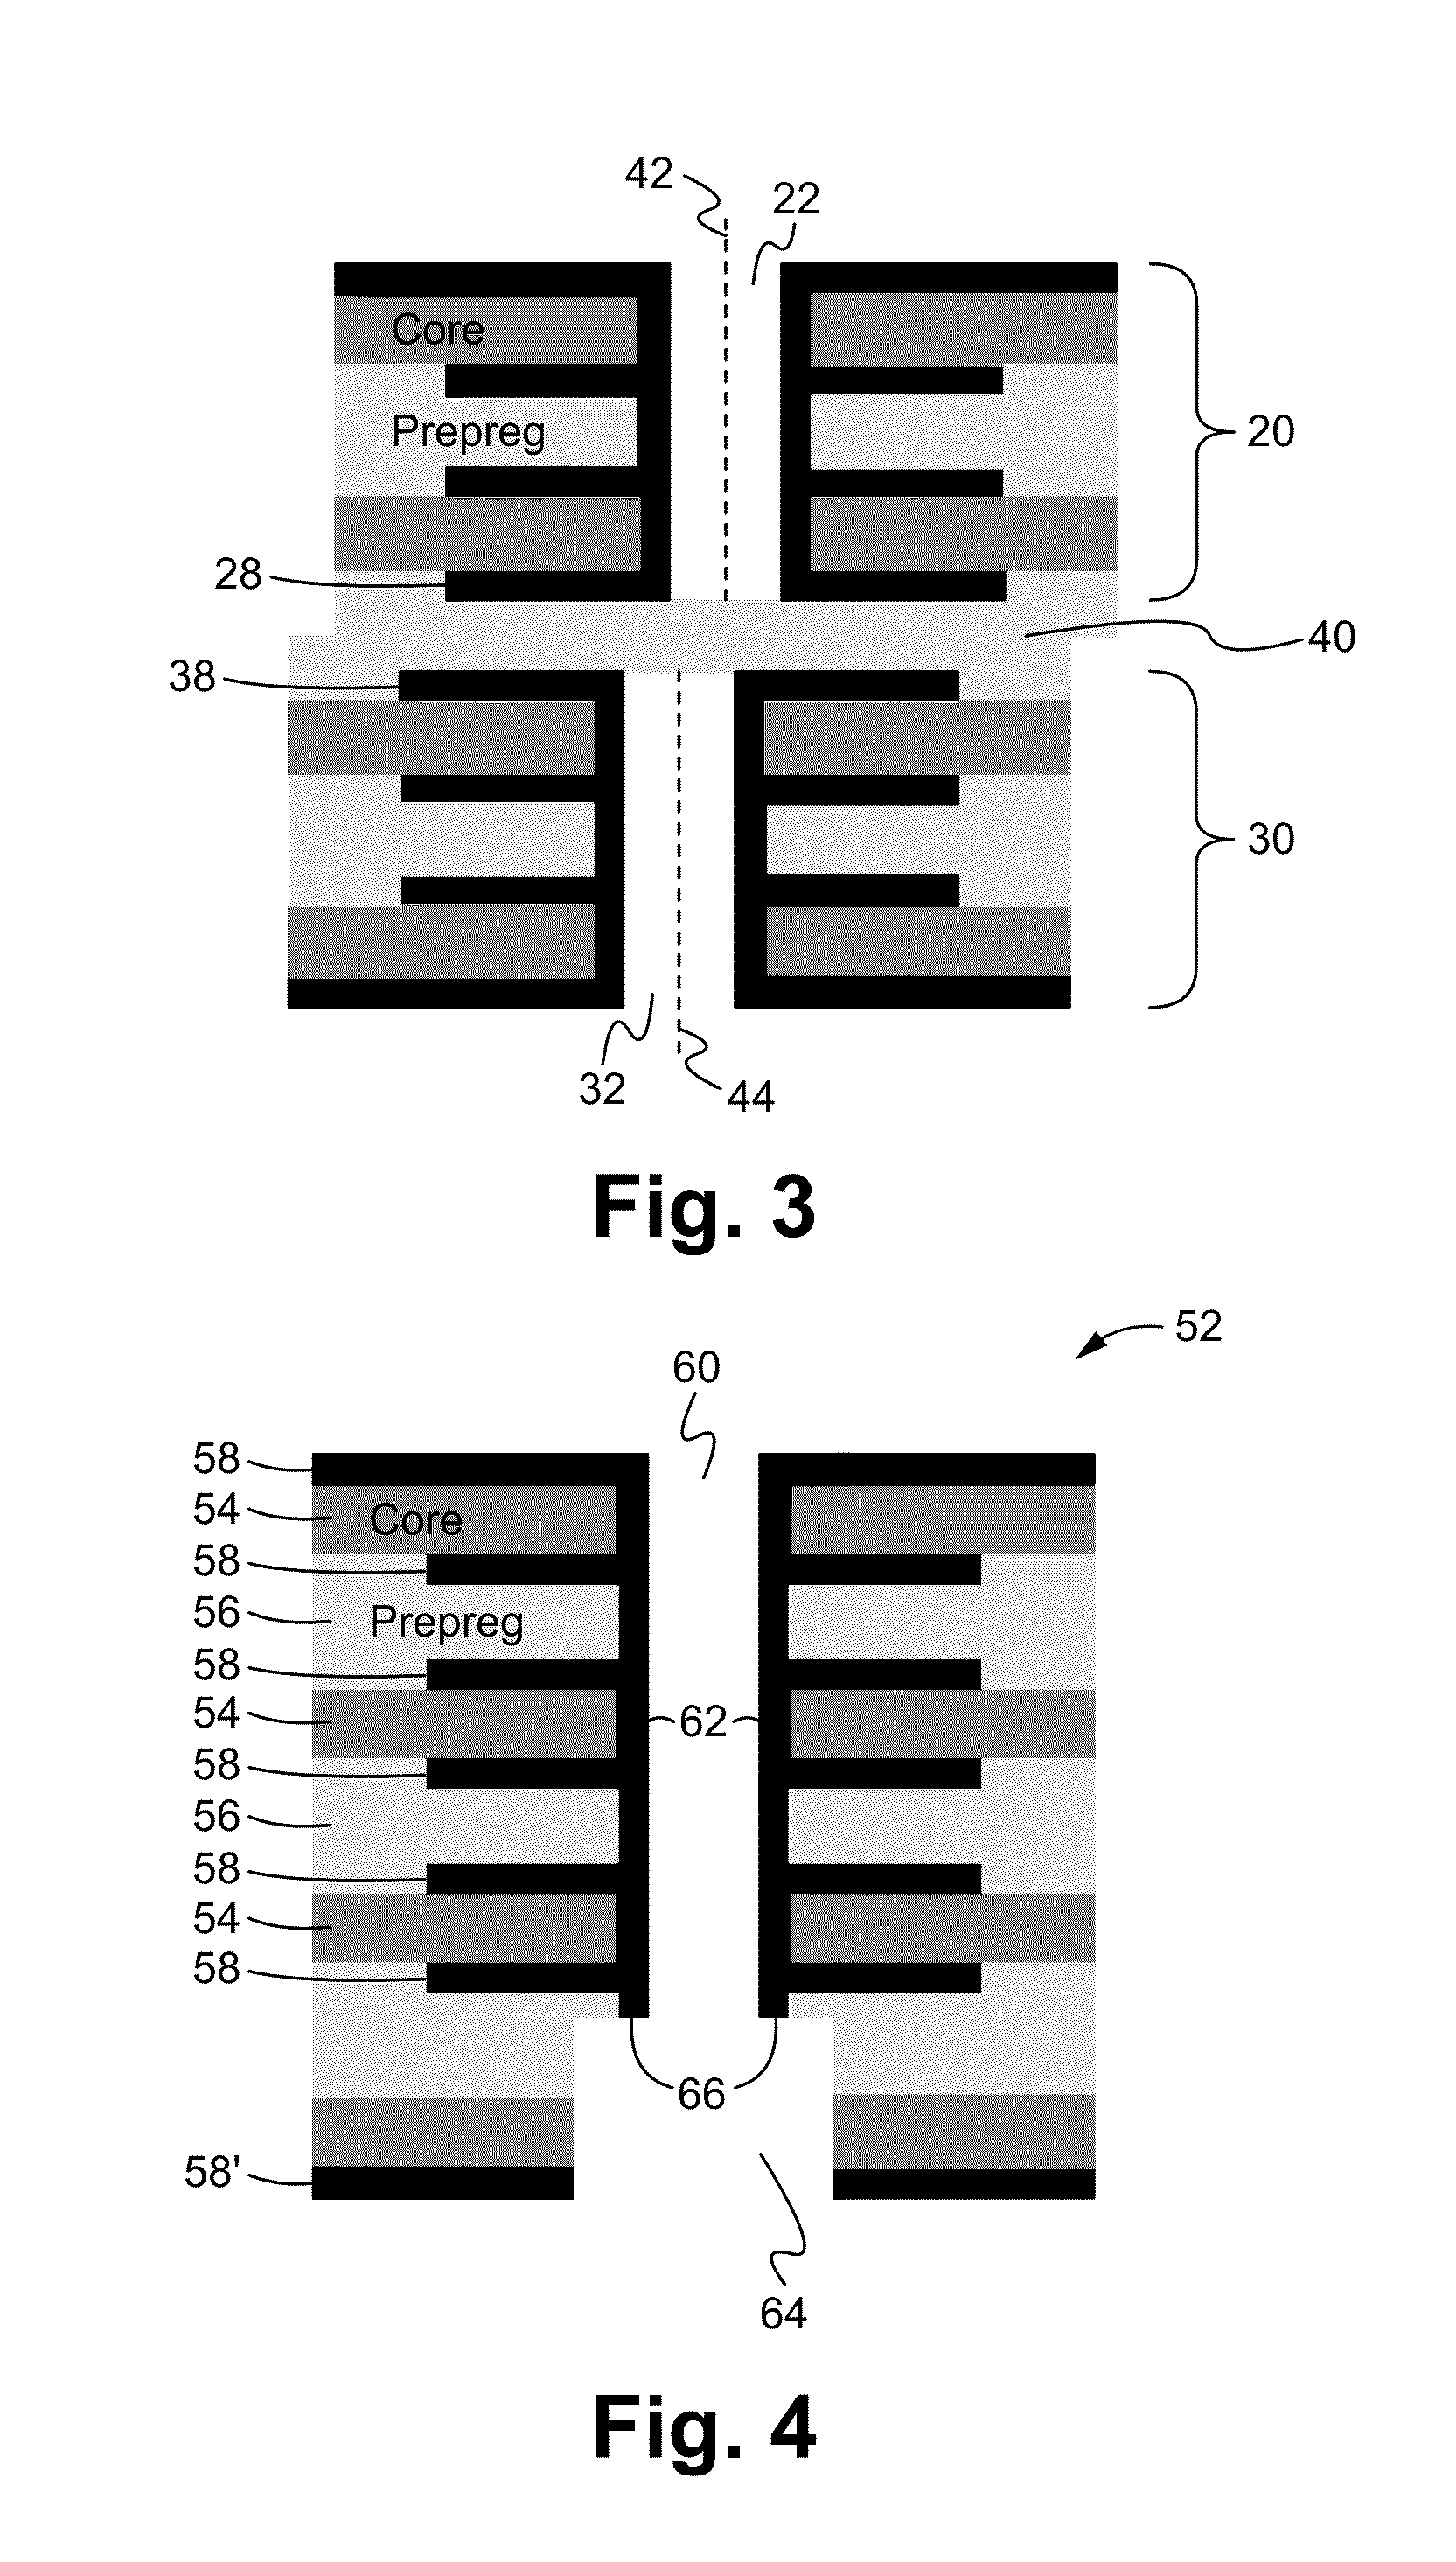 Selective segment via plating process and structure